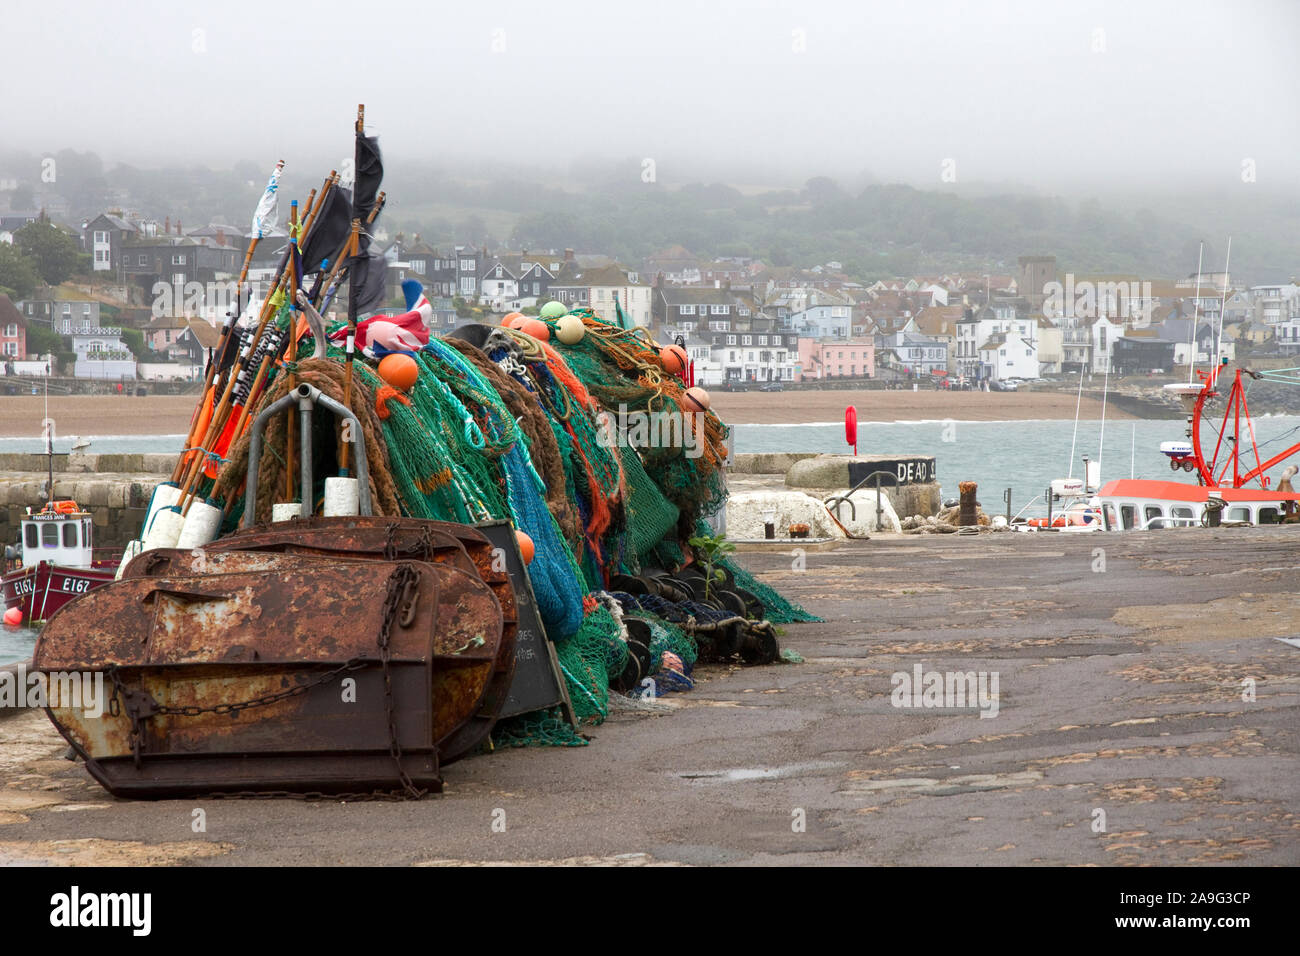 Misty summer day. The Cobb, Harbour and seafront, Lyme Regis, Dorset, England, UK Stock Photo